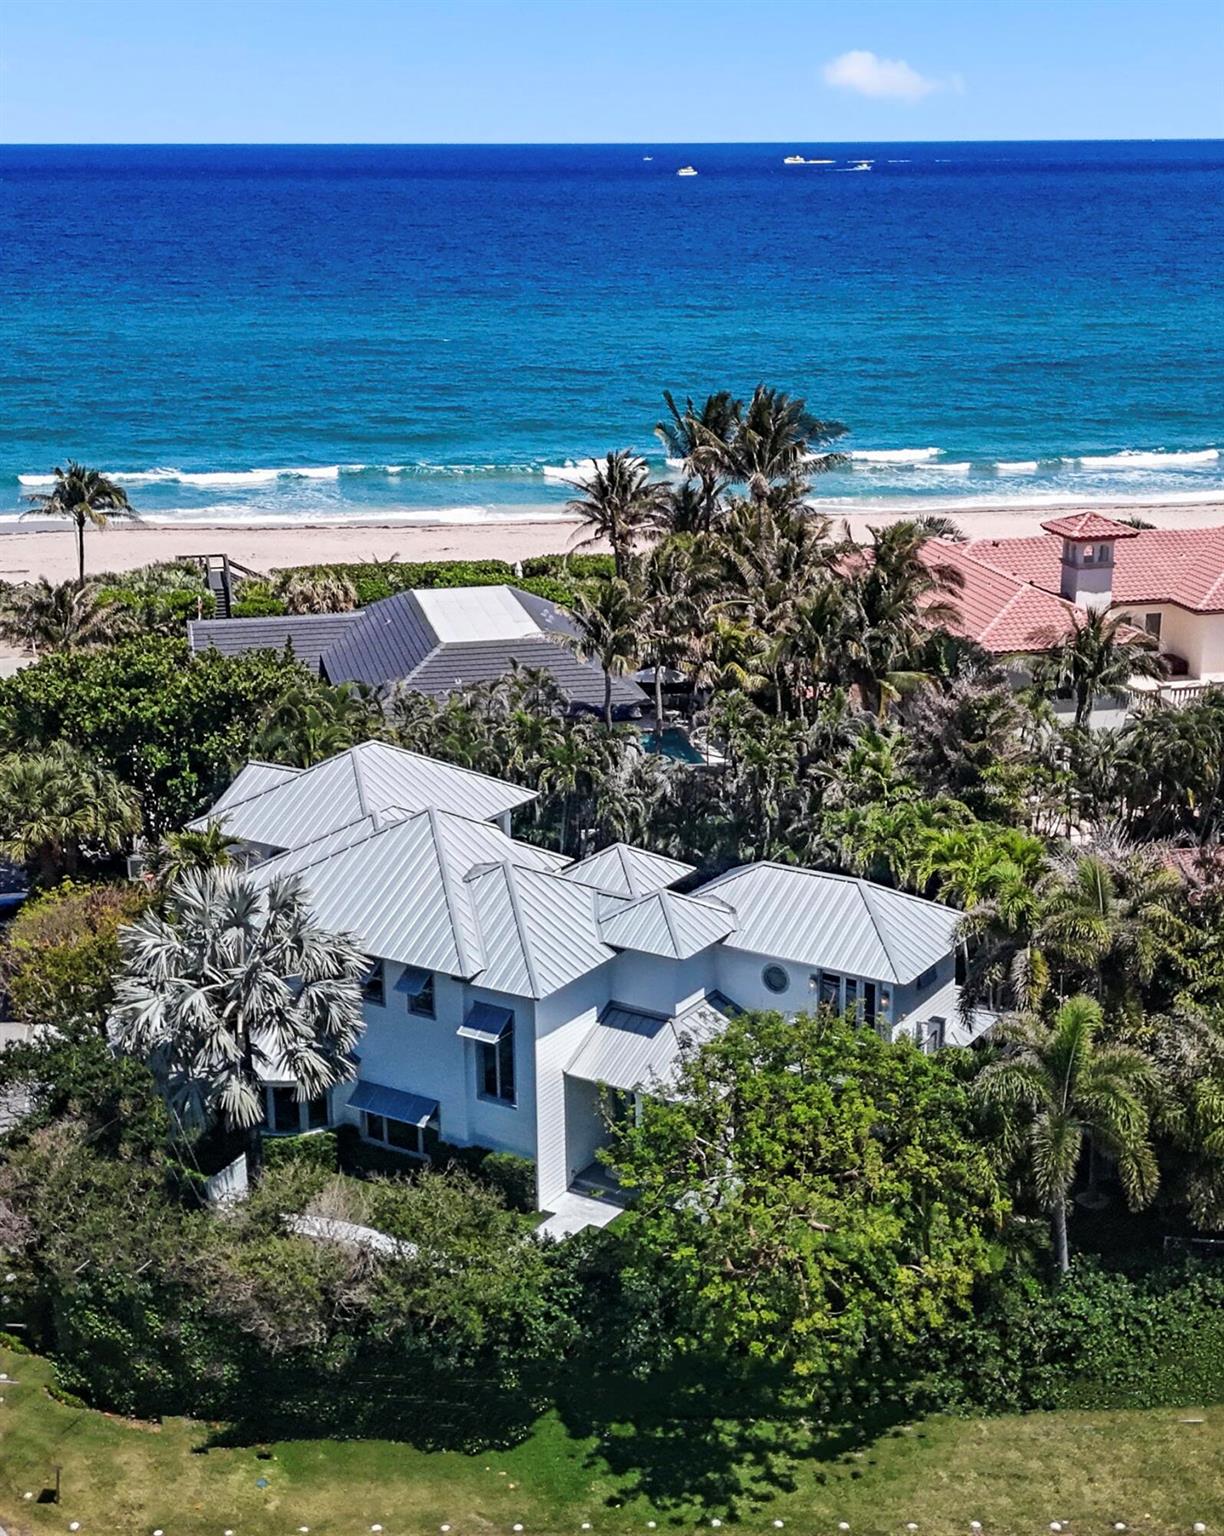 A rare oceanfront opportunity awaits!  Nestled on nearly 1/2 an acre in the highly desirable and quaint seaside town of Ocean Ridge, and located just minutes from Palm Beach and Downtown Delray, this truly turnkey transitional coastal modern home boasts ocean views and over 50ft of private beach space including your own large dune deck.  No expense was spared in the full gut renovation of this stunning home. As you enter the gated property and walk along the winding pathway, you can hear the sounds of the ocean, smell the saltwater in the air, and feel the sense of tranquility that comes from the private, spacious, tropical yard.  As you enter the home, you are immediately struck by the soaring vaulted ceilings and walls of glass creating a bright and airy sanctuary. The new white oak floors that run throughout as well as the fresh white paint and designer fixtures underscore the luxury beachside feel of the home. The open living and formal dining room lead into a completely remodeled eat-in chef's kitchen boasting solid wood custom cabinetry, quartz countertops, a 6 burner gas cooktop, new Miele dishwasher and coffee machine, a new high-speed Miele oven, and a newly built out walk in pantry with two Sub Zero wine refrigerators and freezer.  The kitchen and living room open onto the fully fenced in tropical backyard oasis which includes a large covered patio, brand new heated saltwater pool and spa, summer kitchen, outdoor shower, and grass turf. Both of the oversized main-floor bedrooms enjoy spacious built-out closets and generous natural light, with one of the bedrooms boasting a completely renovated ensuite bathroom with quartz countertops and designer tile. The striking stairway leads to the sunny second floor where you will find the primary suite and an additional bedroom with ensuite bath, ocean views, and a private balcony.  The master suite is a truly elevated and luxurious retreat with its own wraparound veranda, separate sitting area, an expansive built-out walk-in closet, and a designer bathroom to rival even the highest end hotel spas.  The spacious 3-car garage offers ample storage and includes a newly installed lift for automobile collectors. Enjoy the very best of oceanfront living whether it's from your gorgeous new home, the tropical oasis grounds, or the private beach just steps from your front door!